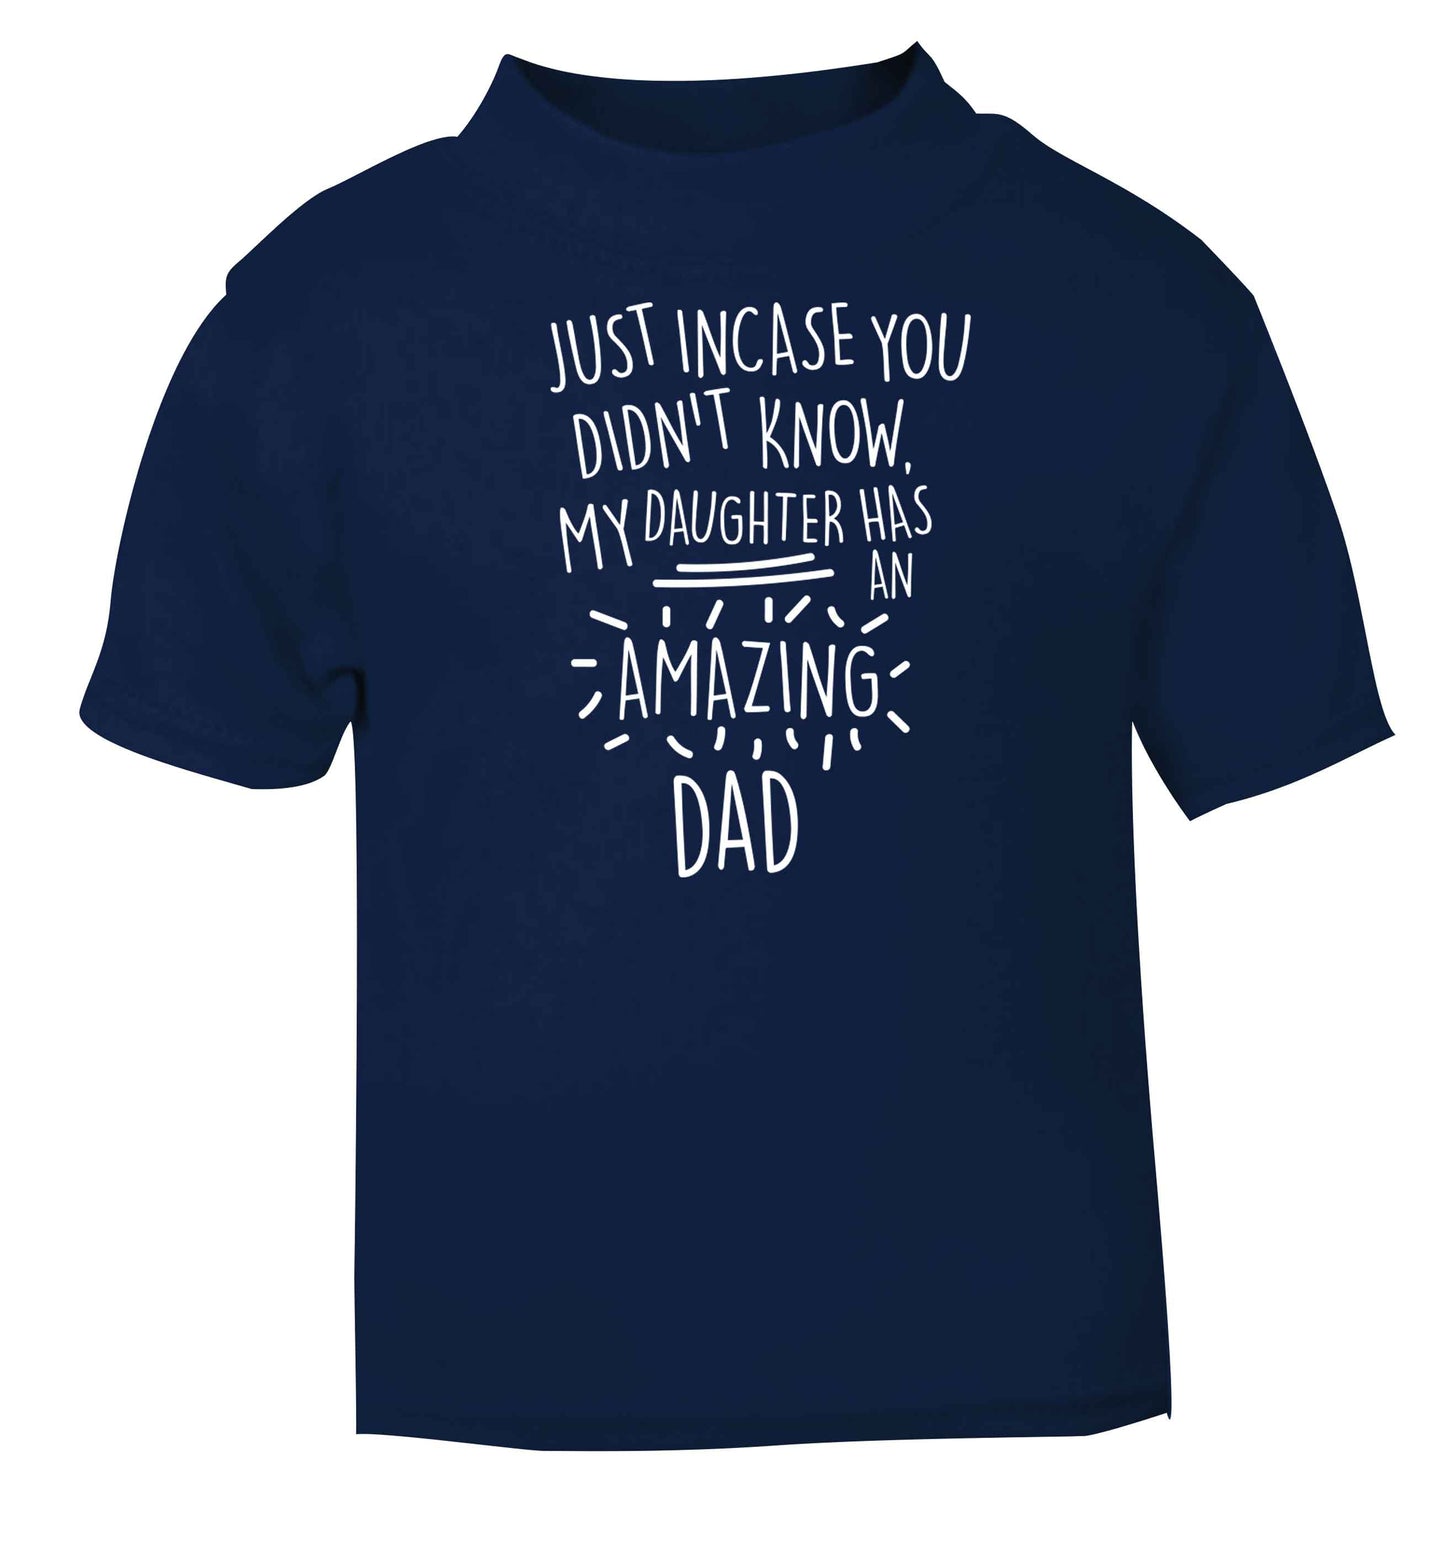 Just incase you didn't know my daughter has an amazing dad navy baby toddler Tshirt 2 Years